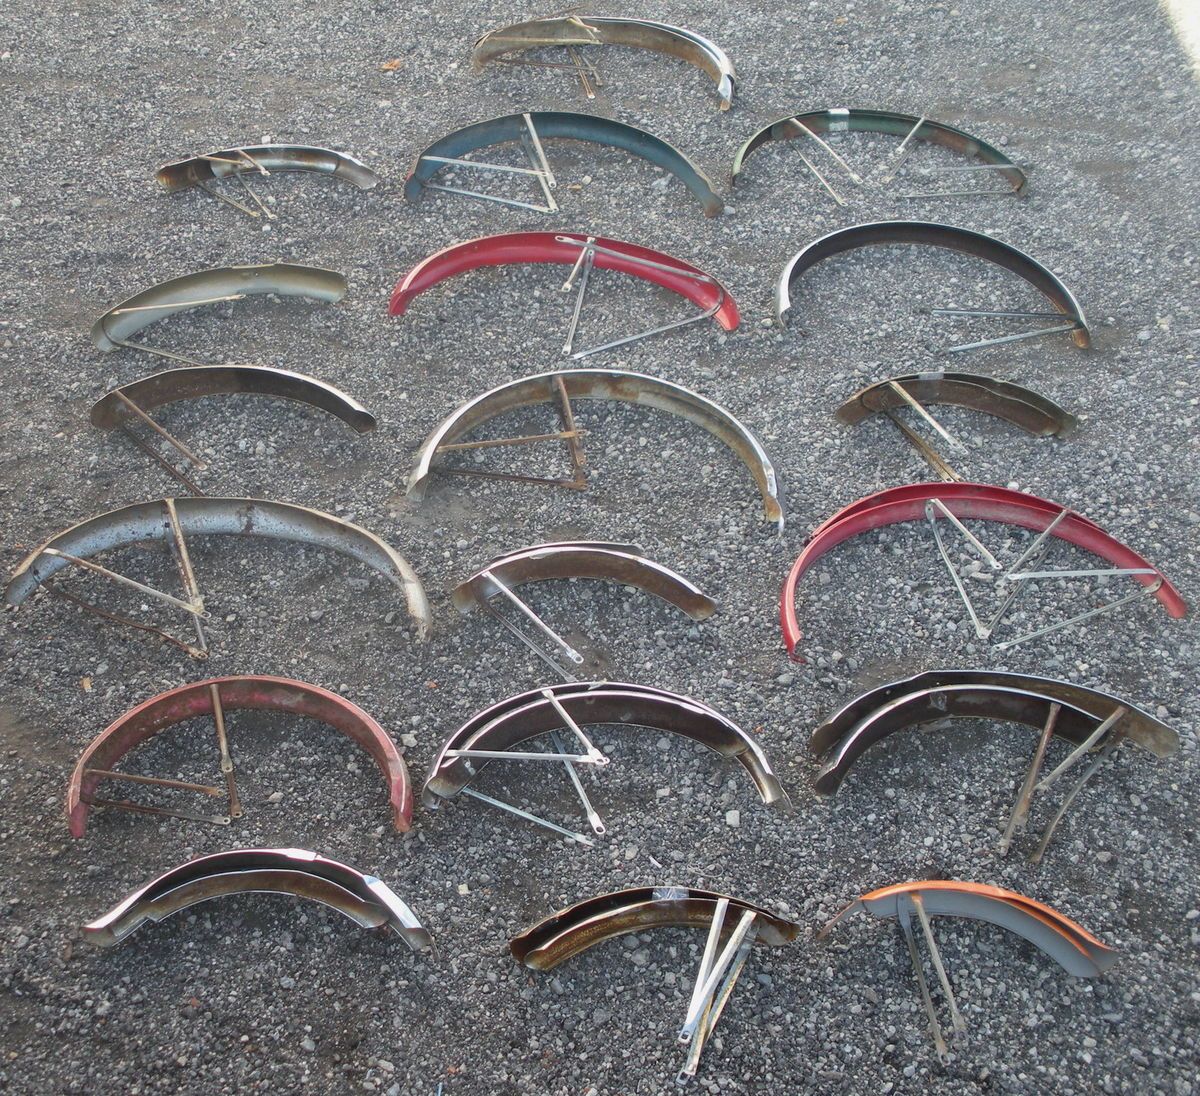   /Reseller Lot of Matched Mismatched & Individual Vtg Bicycle Fenders